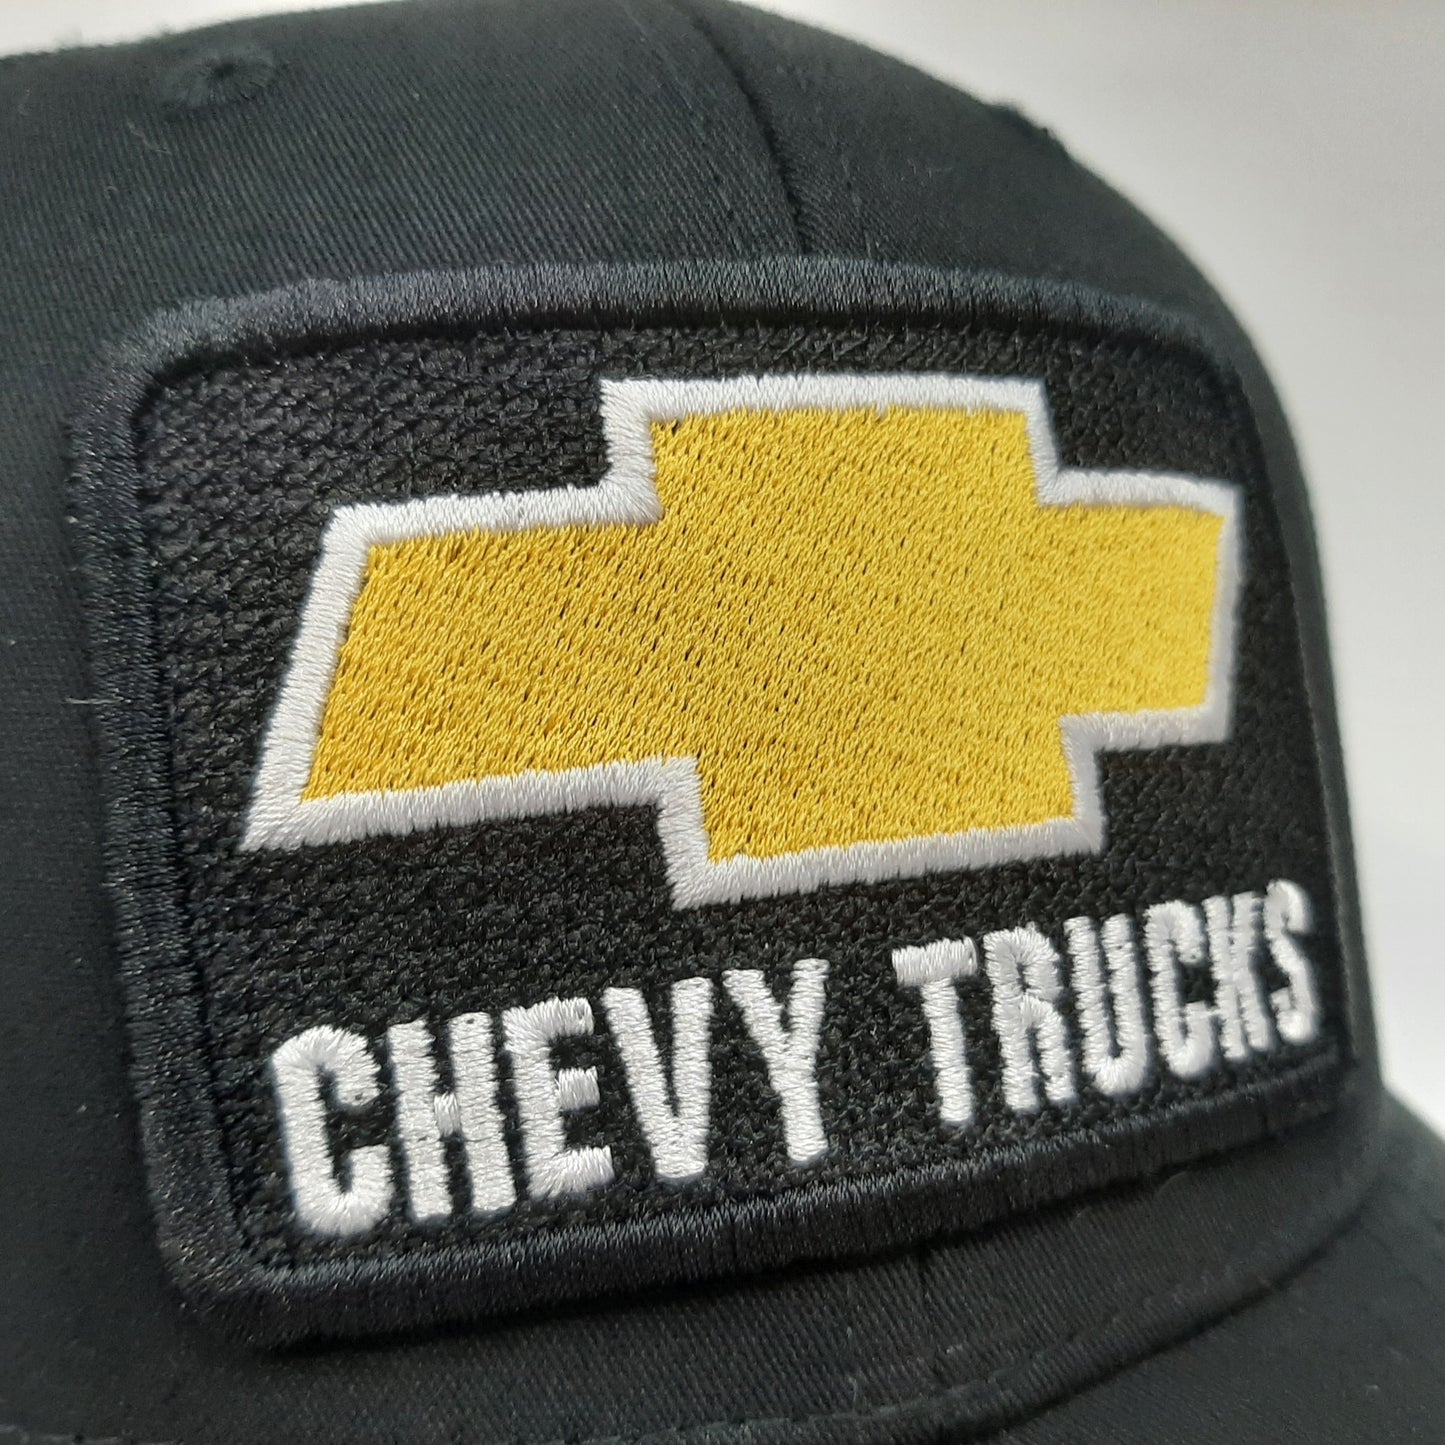 Chevy Trucks Embroidered Patch Richardson 112 Curved Bill Trucker Mesh Snapback Cap Hat Black Size XL